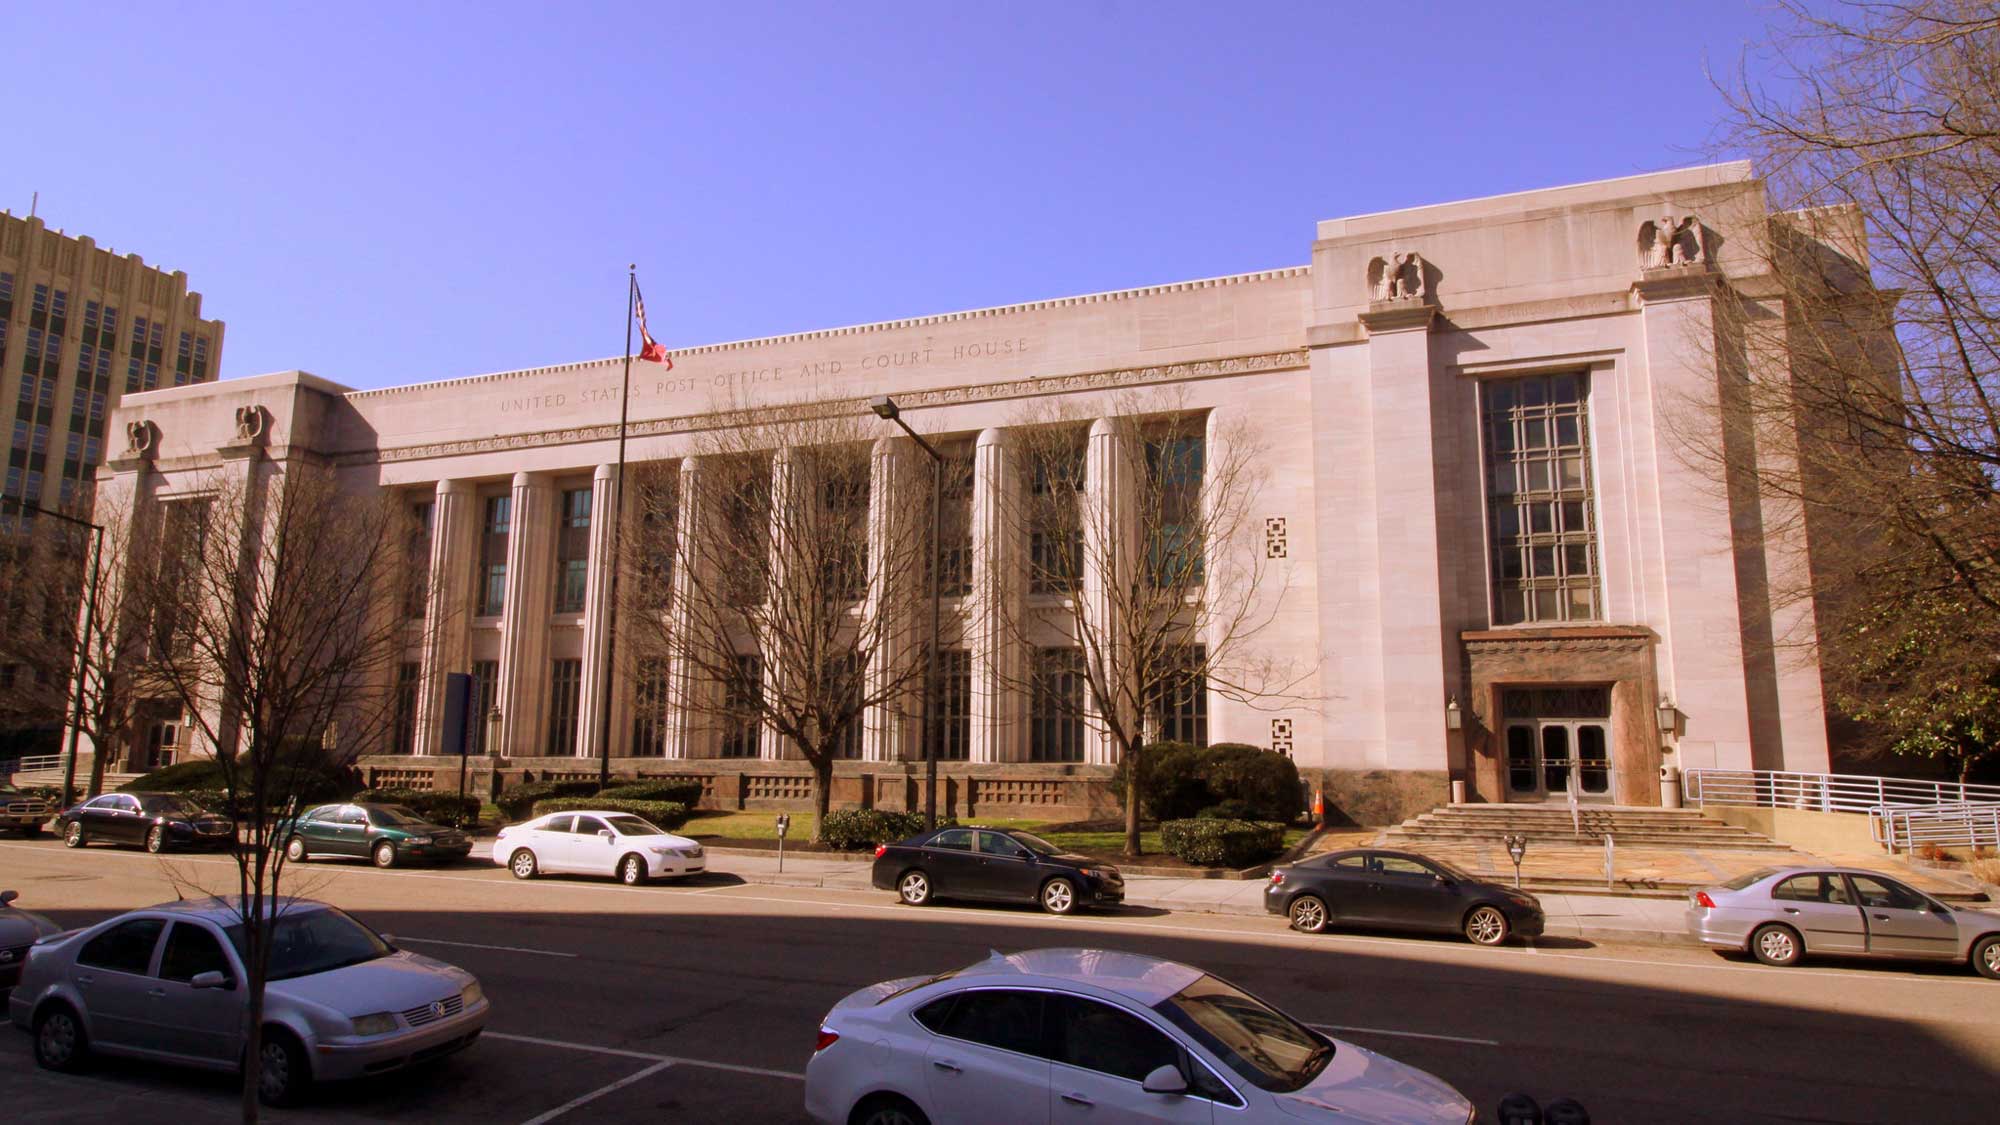 Photograph of the U.S. Post Office and Courthouse in Knoxville, Tennessee.